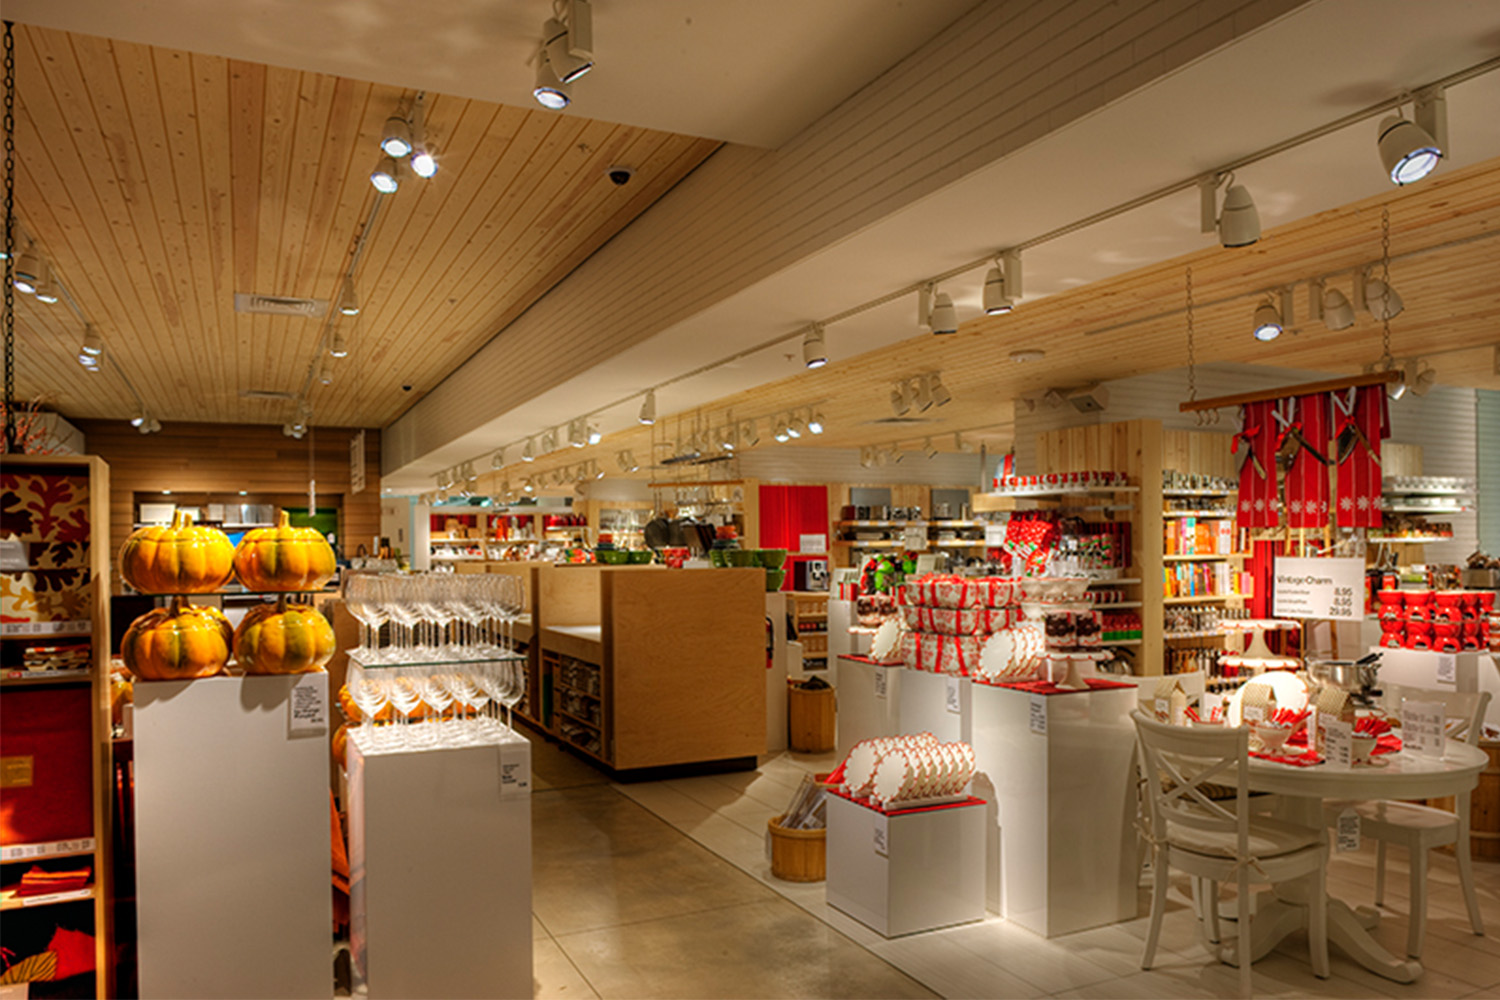 Store merchandise consisting of ceramic pumpkin containers, flower-shaped plates, fondue sets, and various other kitchen materials